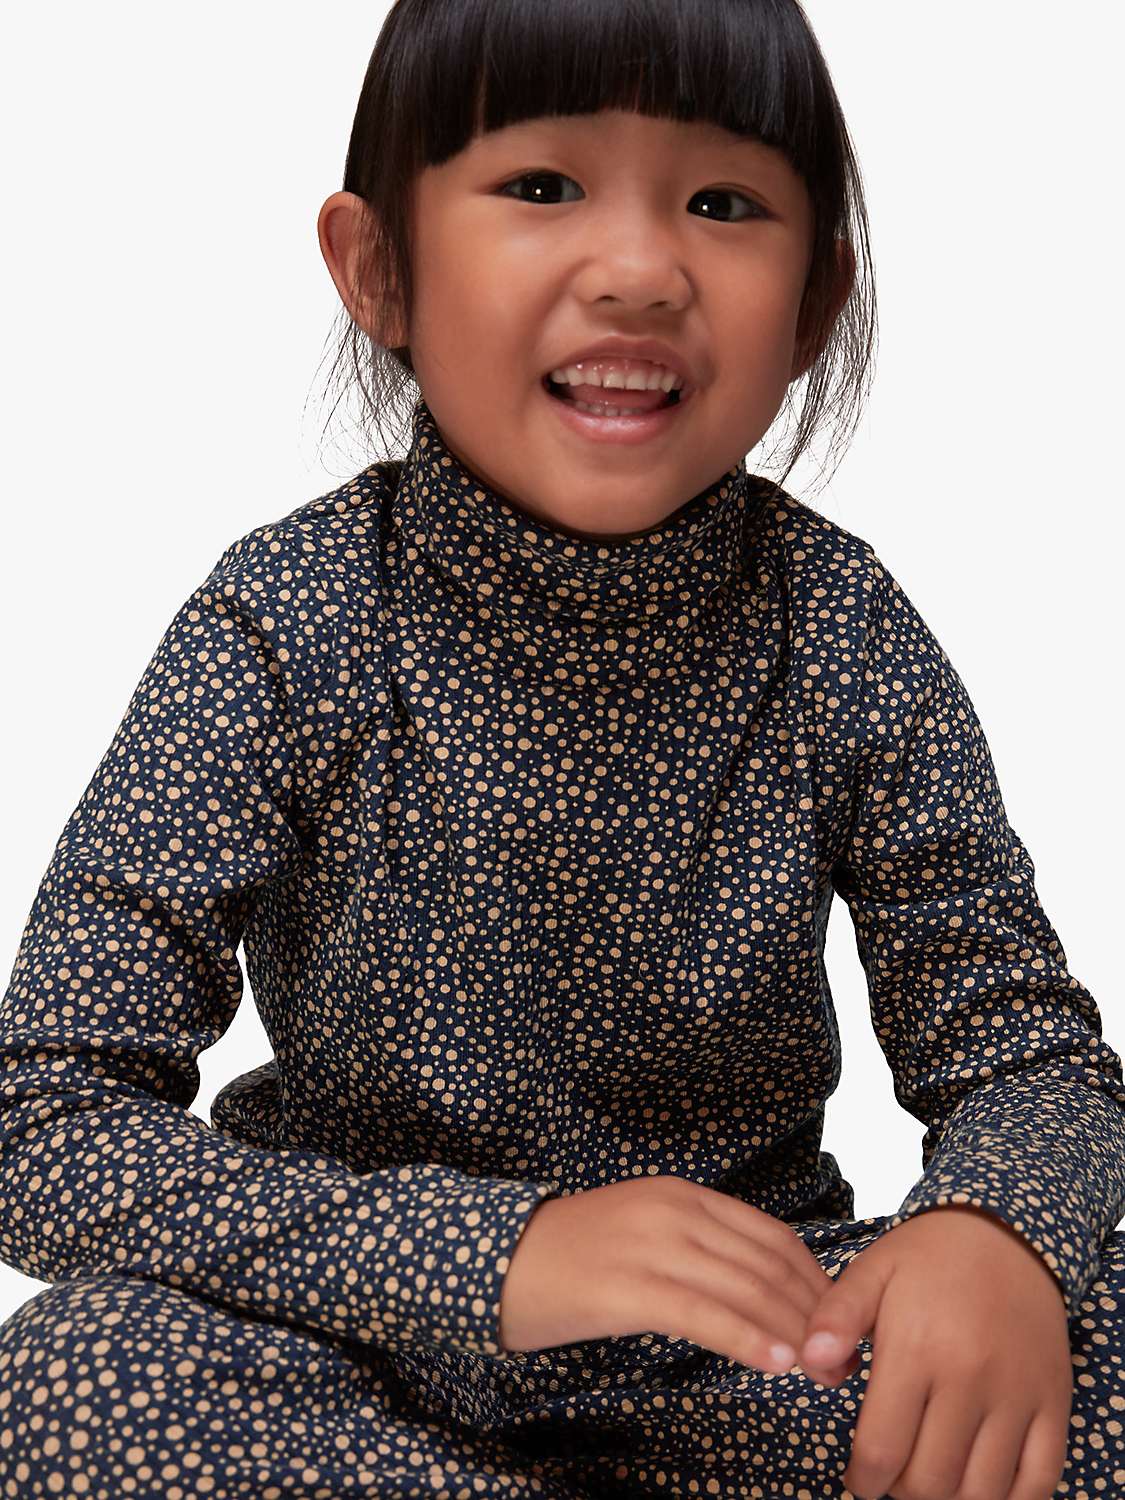 Buy Whistles Kids' Spot Ribbed Flared Trousers, Navy/Multi Online at johnlewis.com